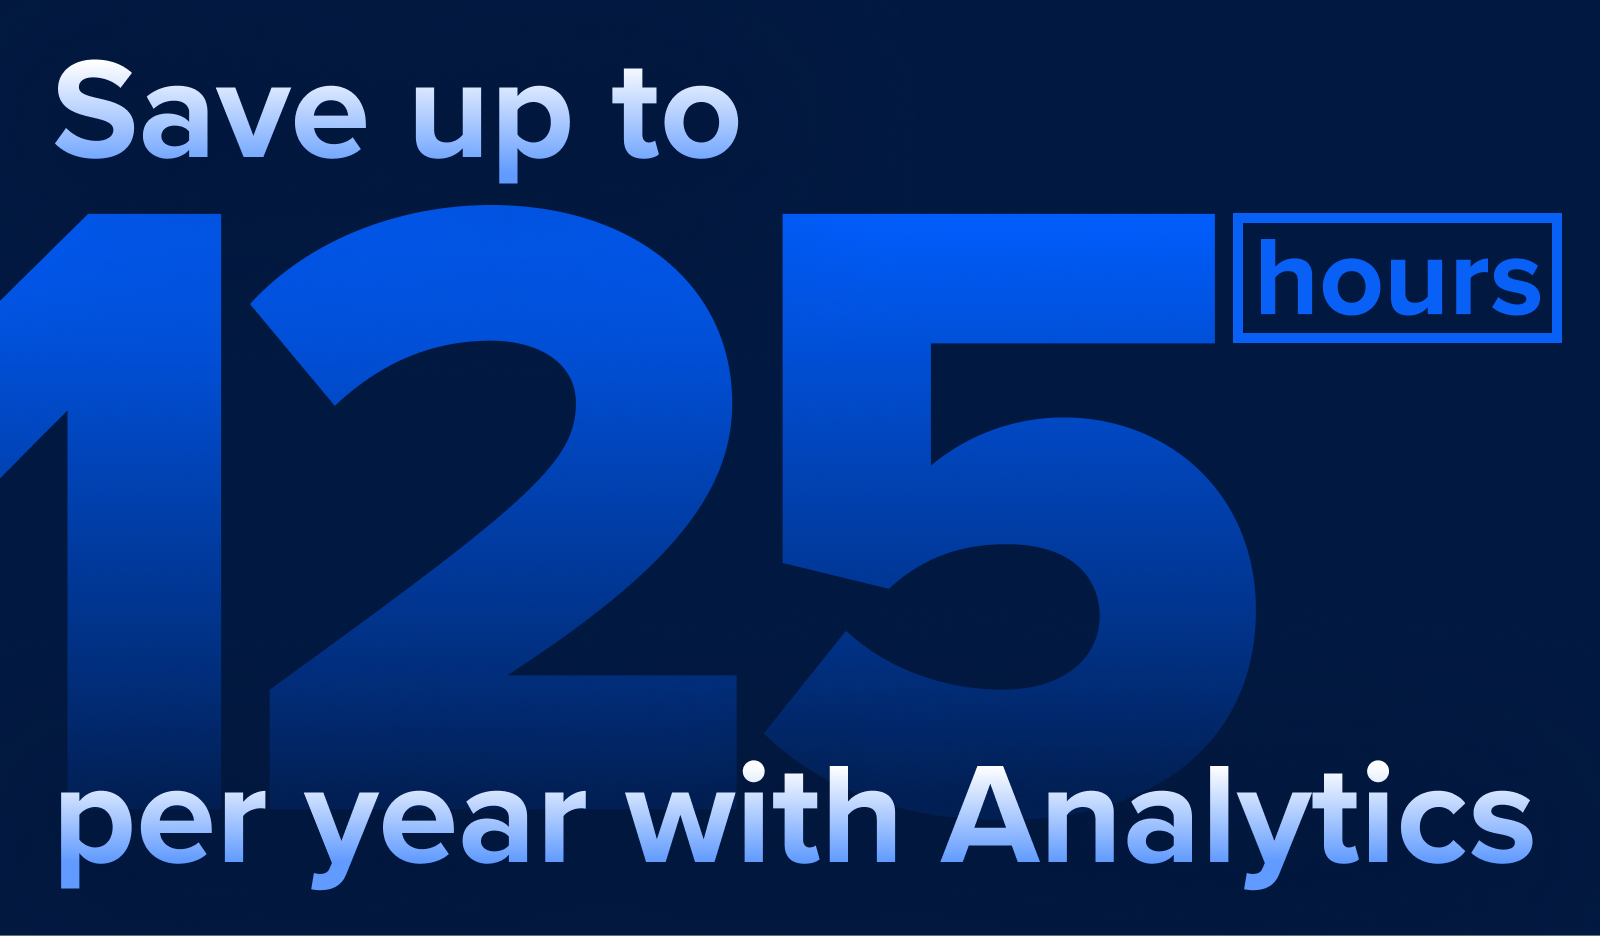 Save up to 125 hours per year with Analytics